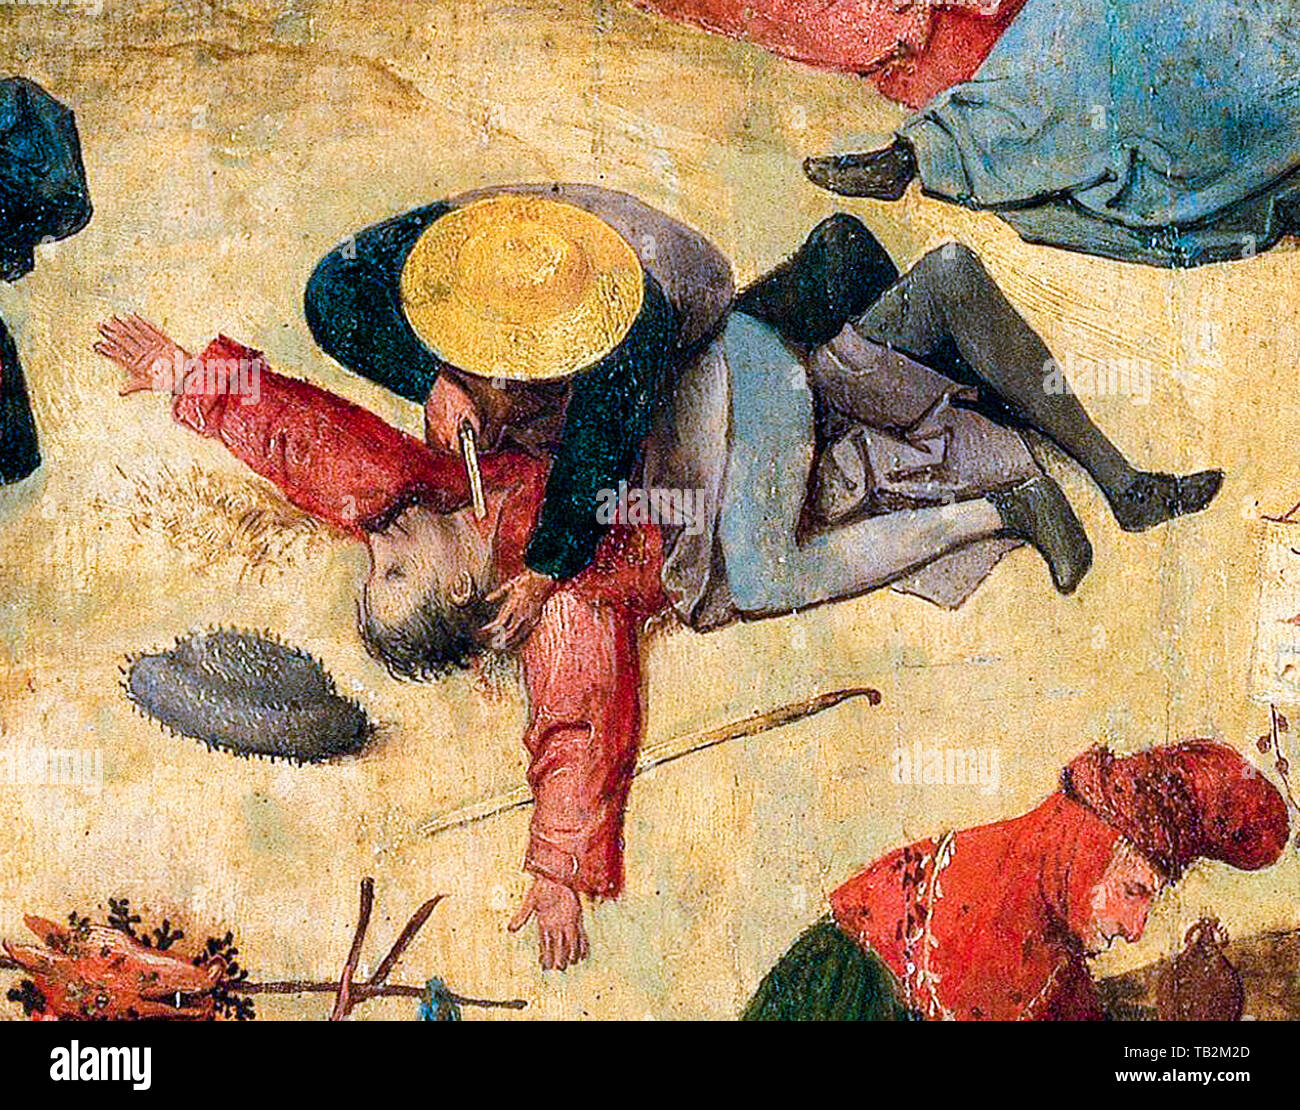 Hieronymus Bosch, The Hay Wagon (Prado), central panel, Detail, man cuts another man's throat with a knife, murder, painting, circa 1516 Stock Photo